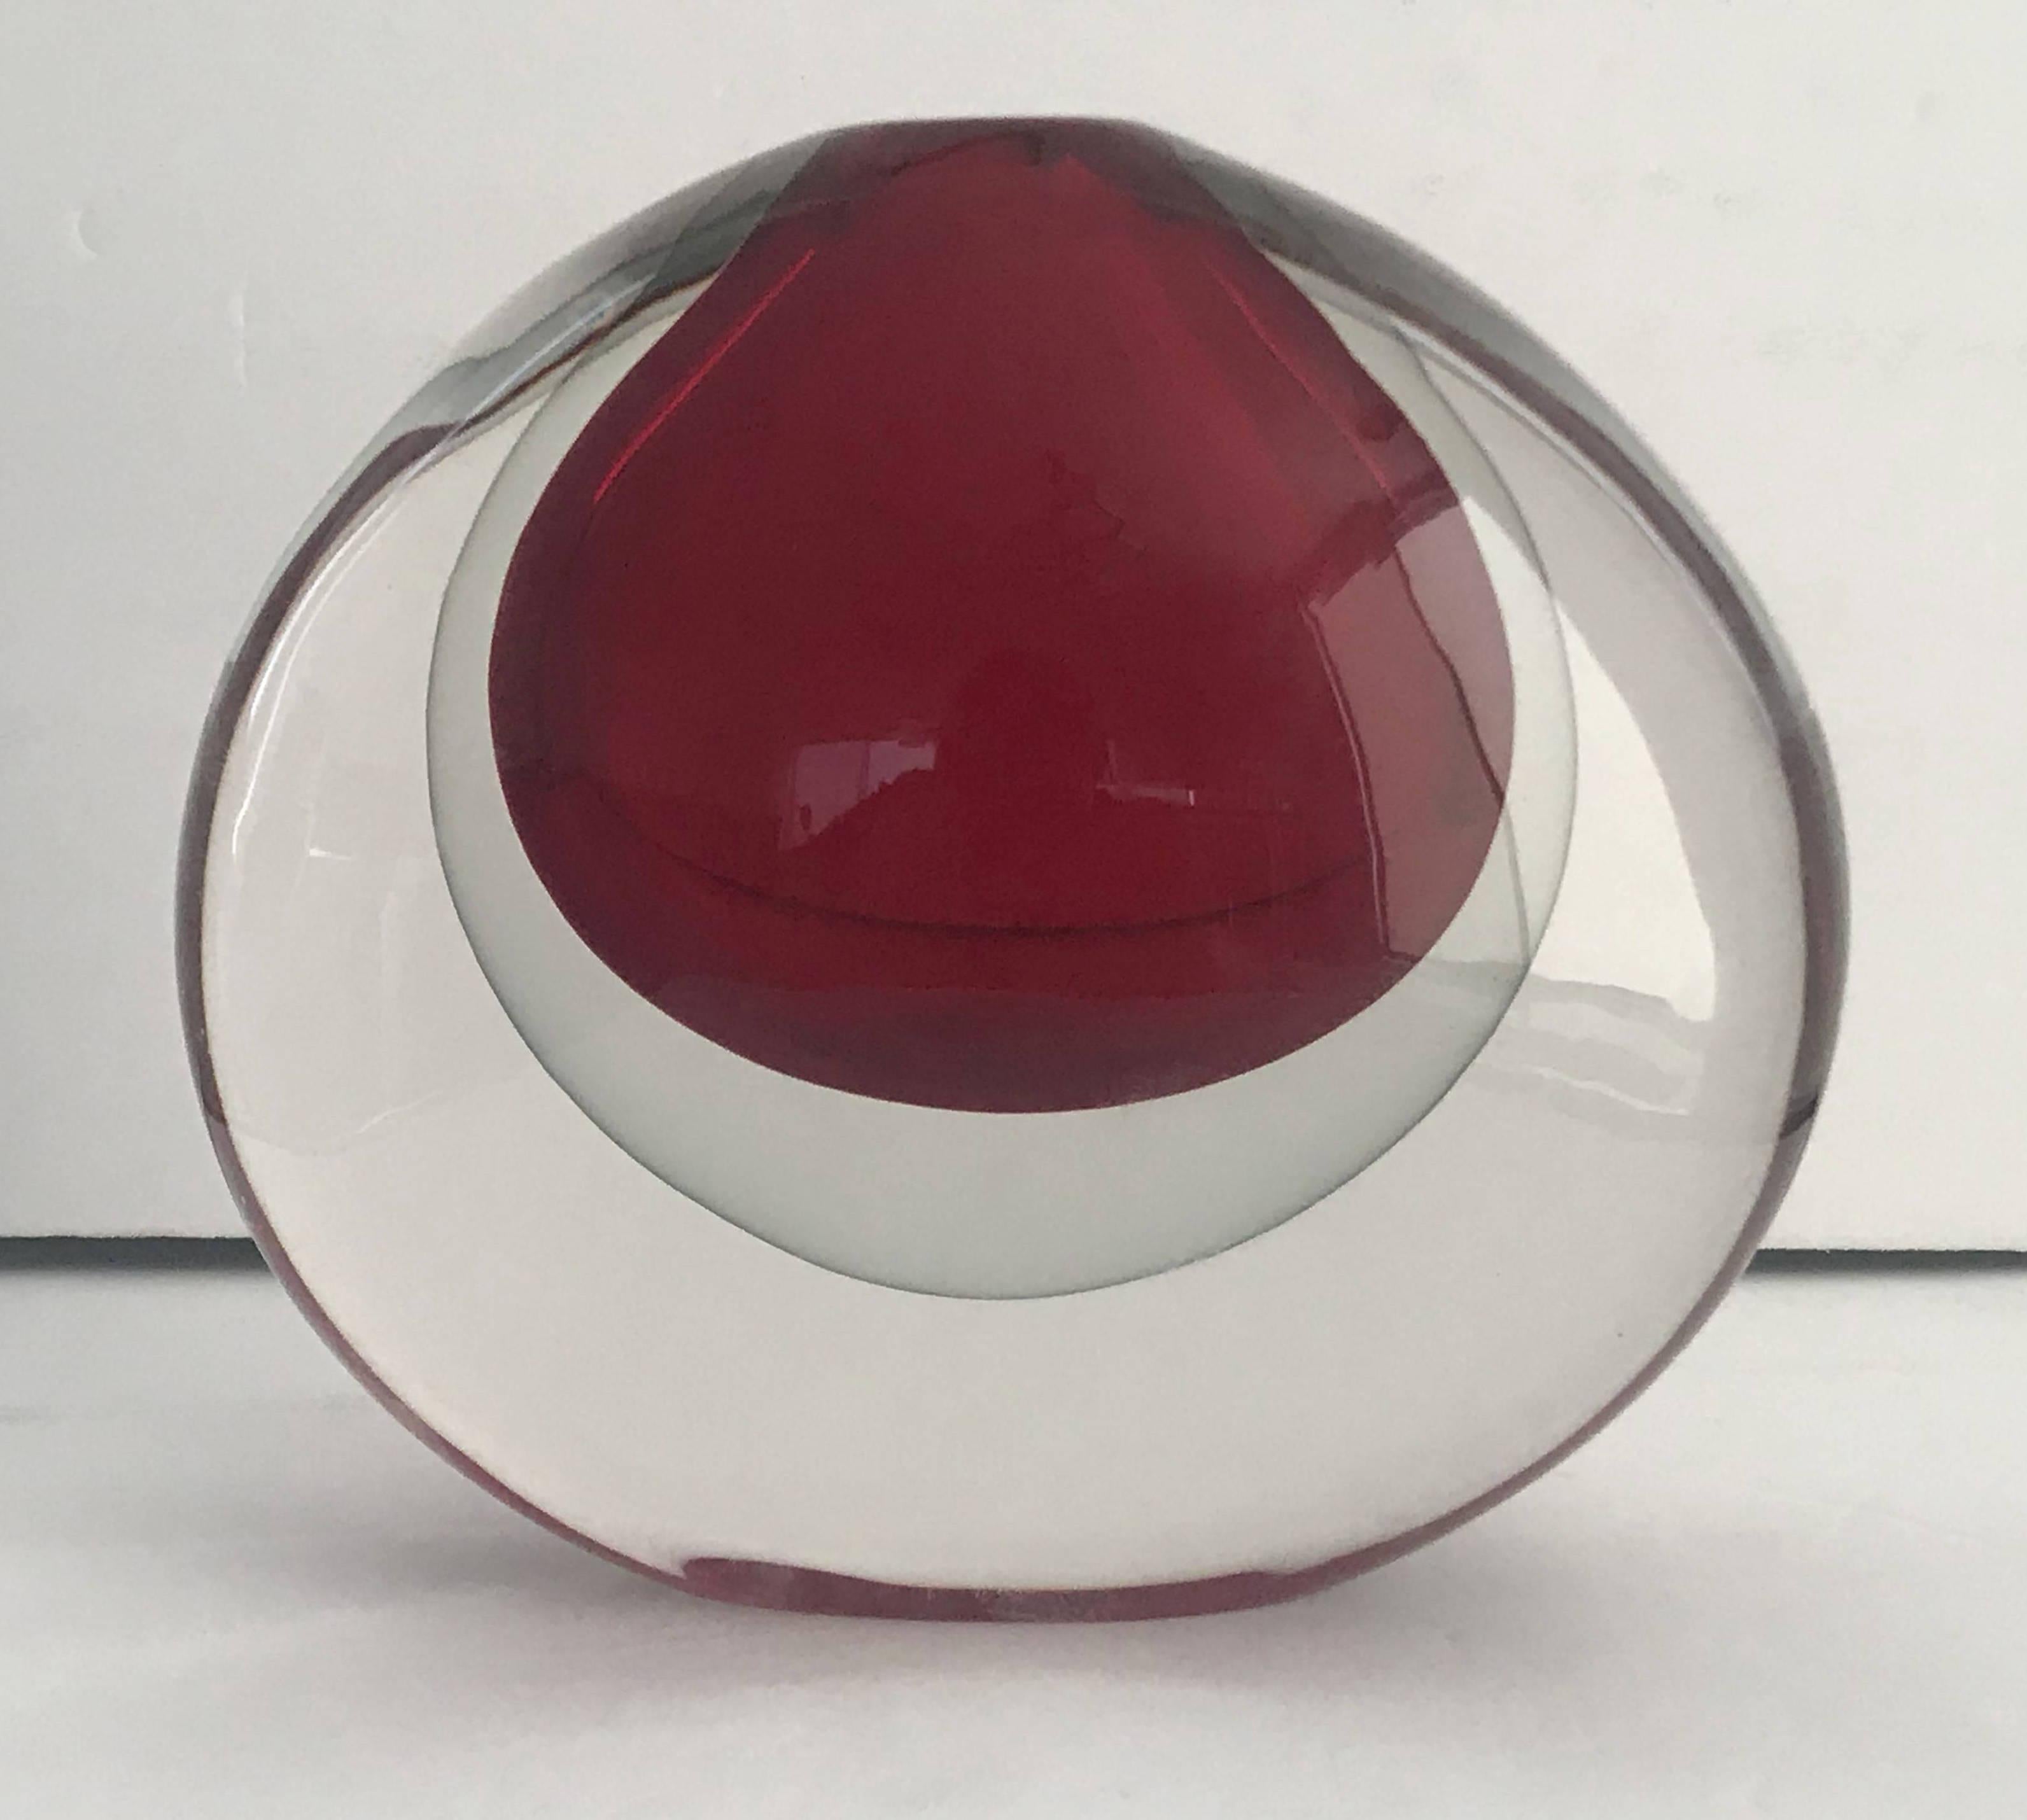 Italian Murano glass vase or sculpture hand blown in Sommerso technique to form elegant layers in clear, smoky and red / Made in Italy by Salviati, circa 1980s
Original sticker on the vase
Measures: Height 7.5 inches, width 8.5 inches, depth 4.5